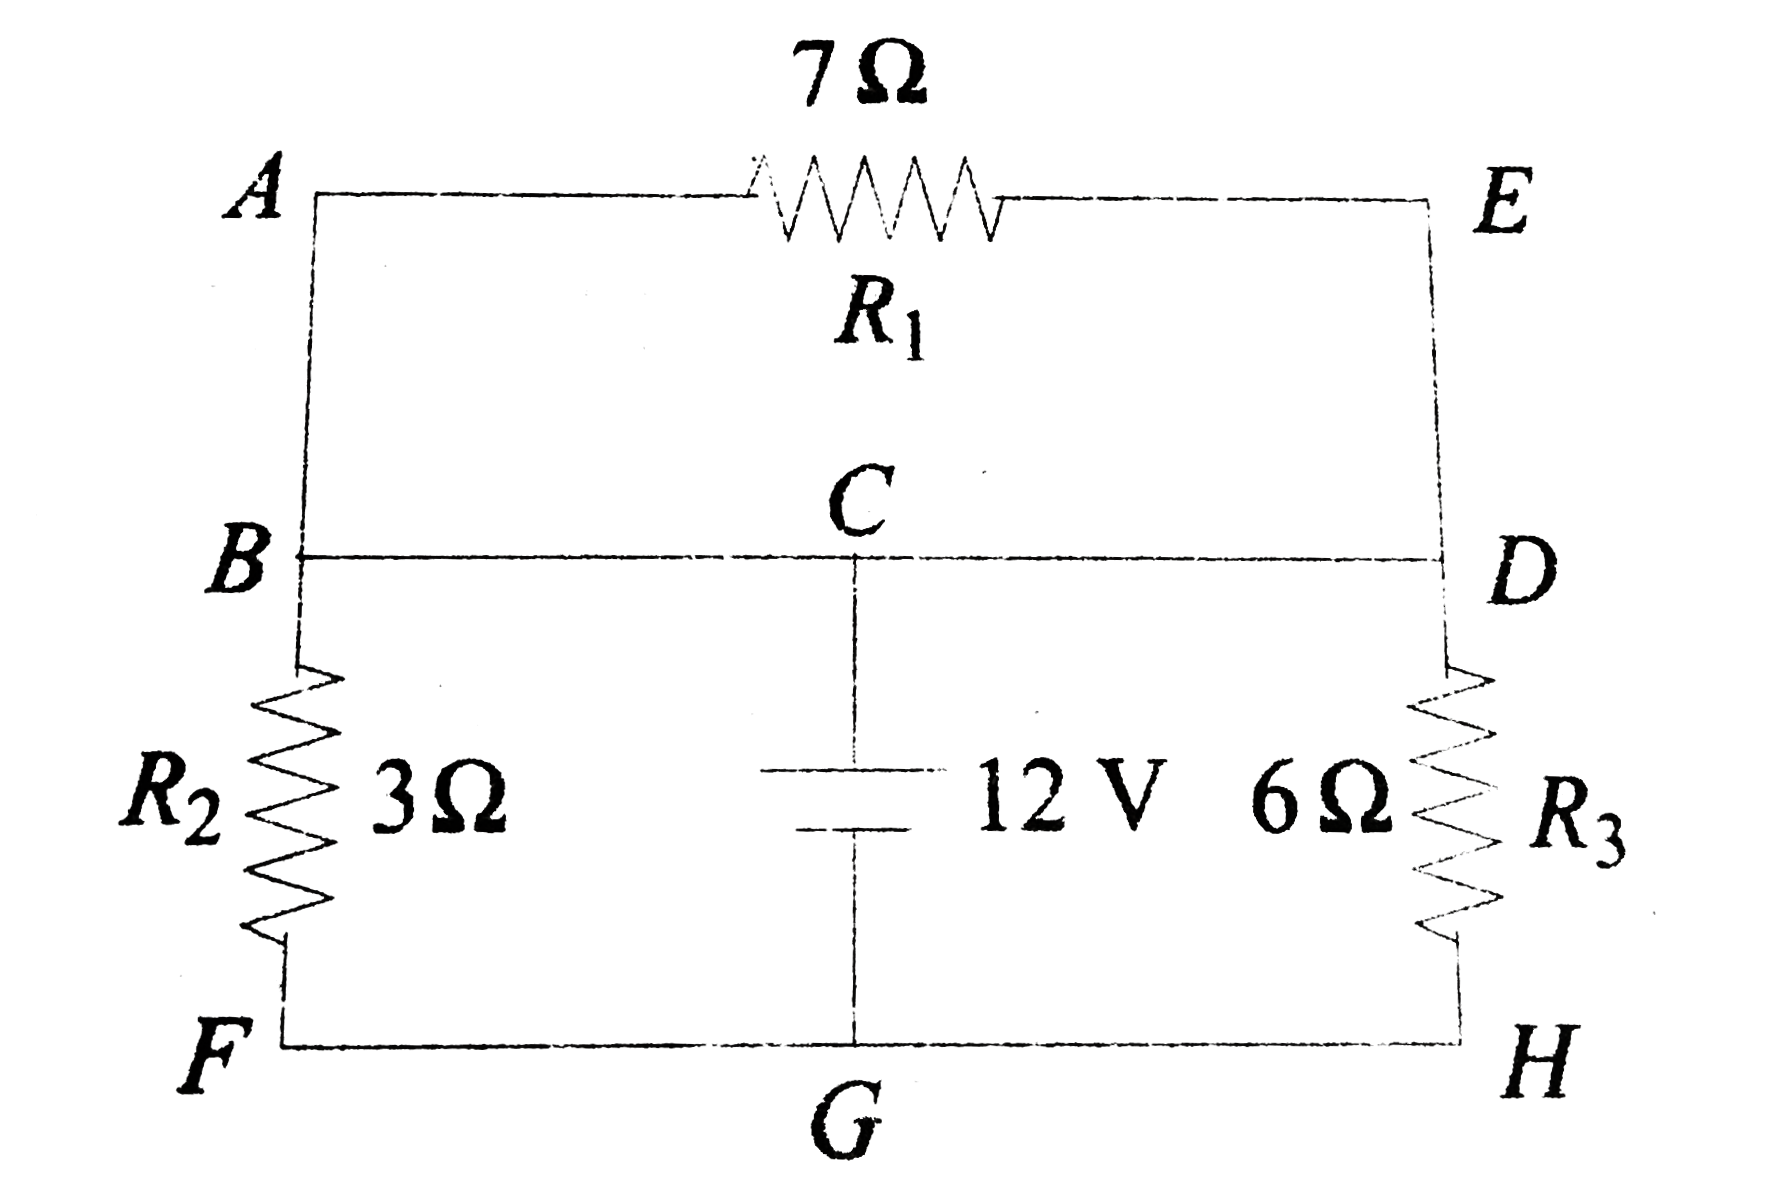 A single battery is connected to three resistances as shown in fig. 5.316